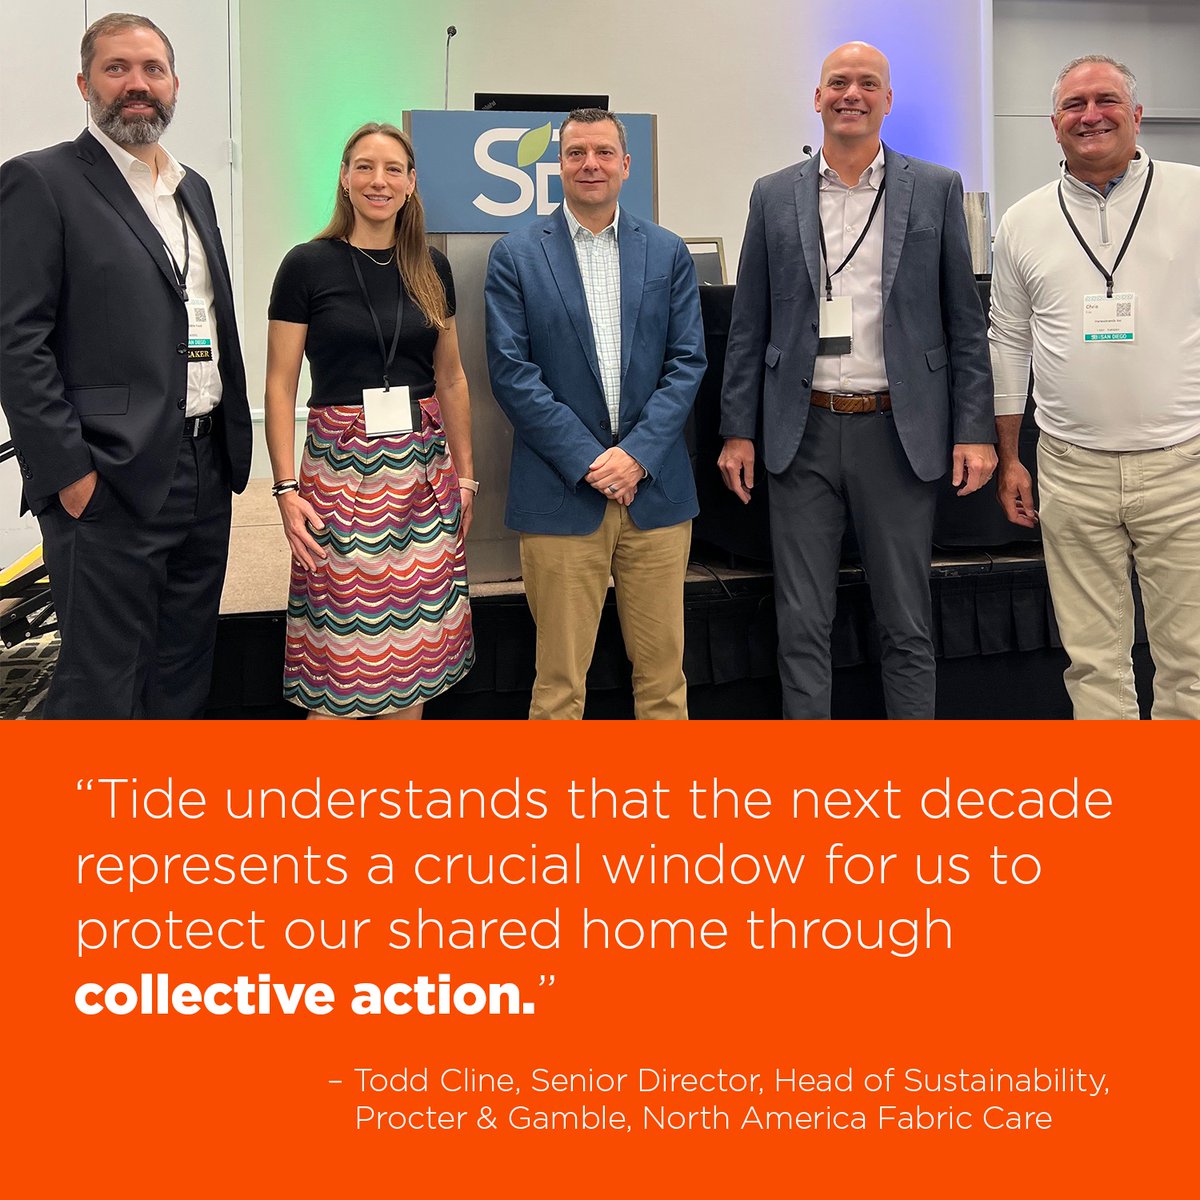 Want to create more eco-friendly habits?  @Hanes, @GEAppliancesCo and @World_Wildlife joined us @SustainBrands to discuss changing routines and how washing laundry in cold water is better for our planet and your wallet. We love to share the #TurnToCold benefits. #OurFutureIsClean